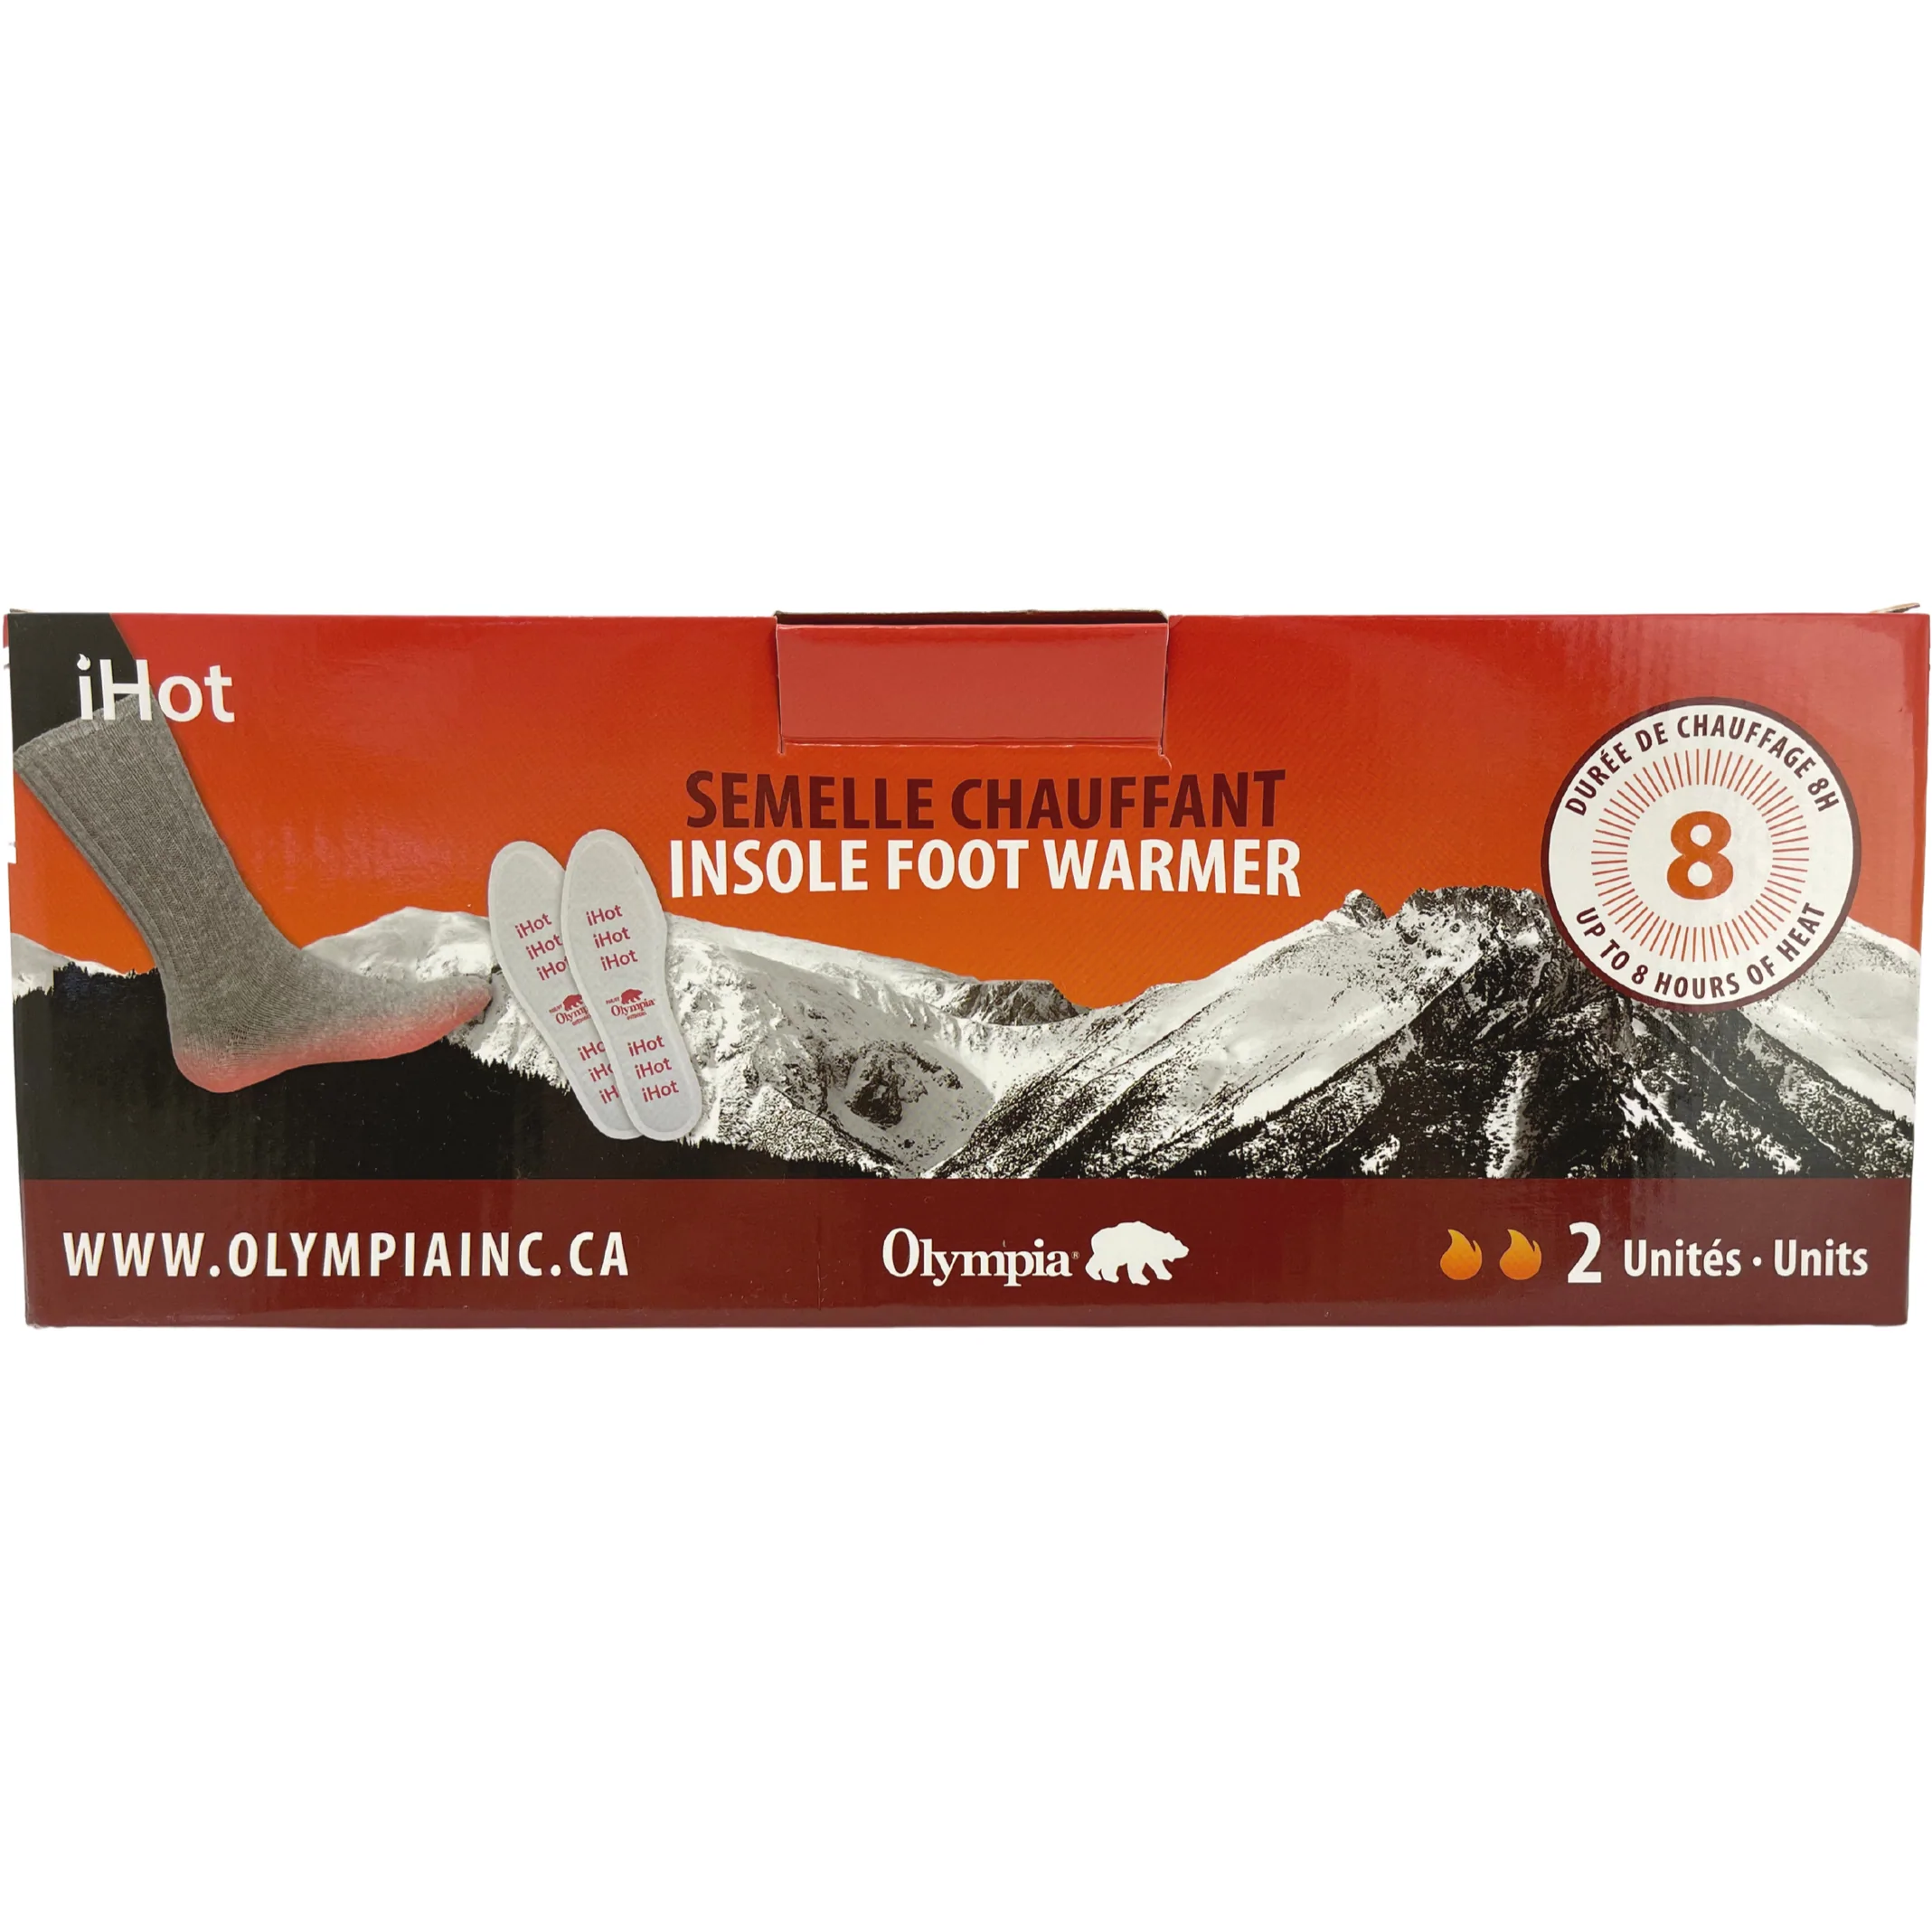 iHot Insole Foot Warmers / 16 Packs / Up to 8 Hours of Warmth / Outdoor Winter Gear